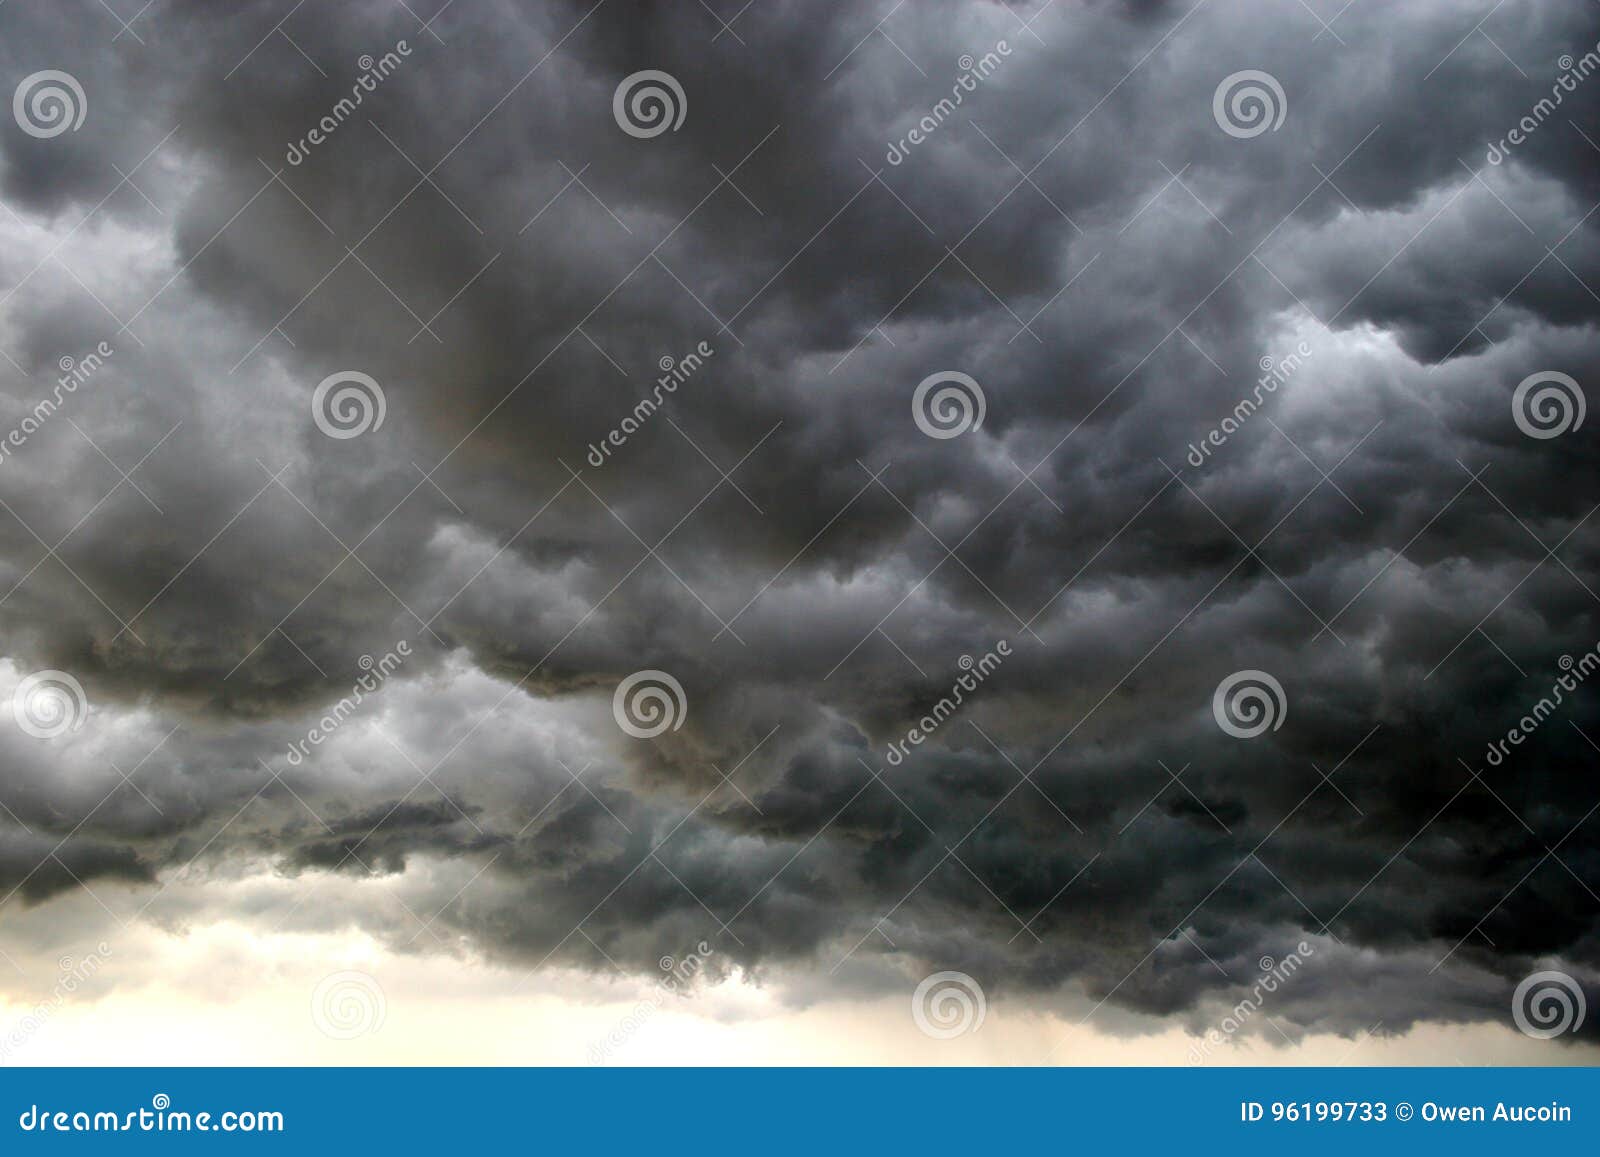 193 197 Storm Cloud Photos Free Royalty Free Stock Photos From Dreamstime